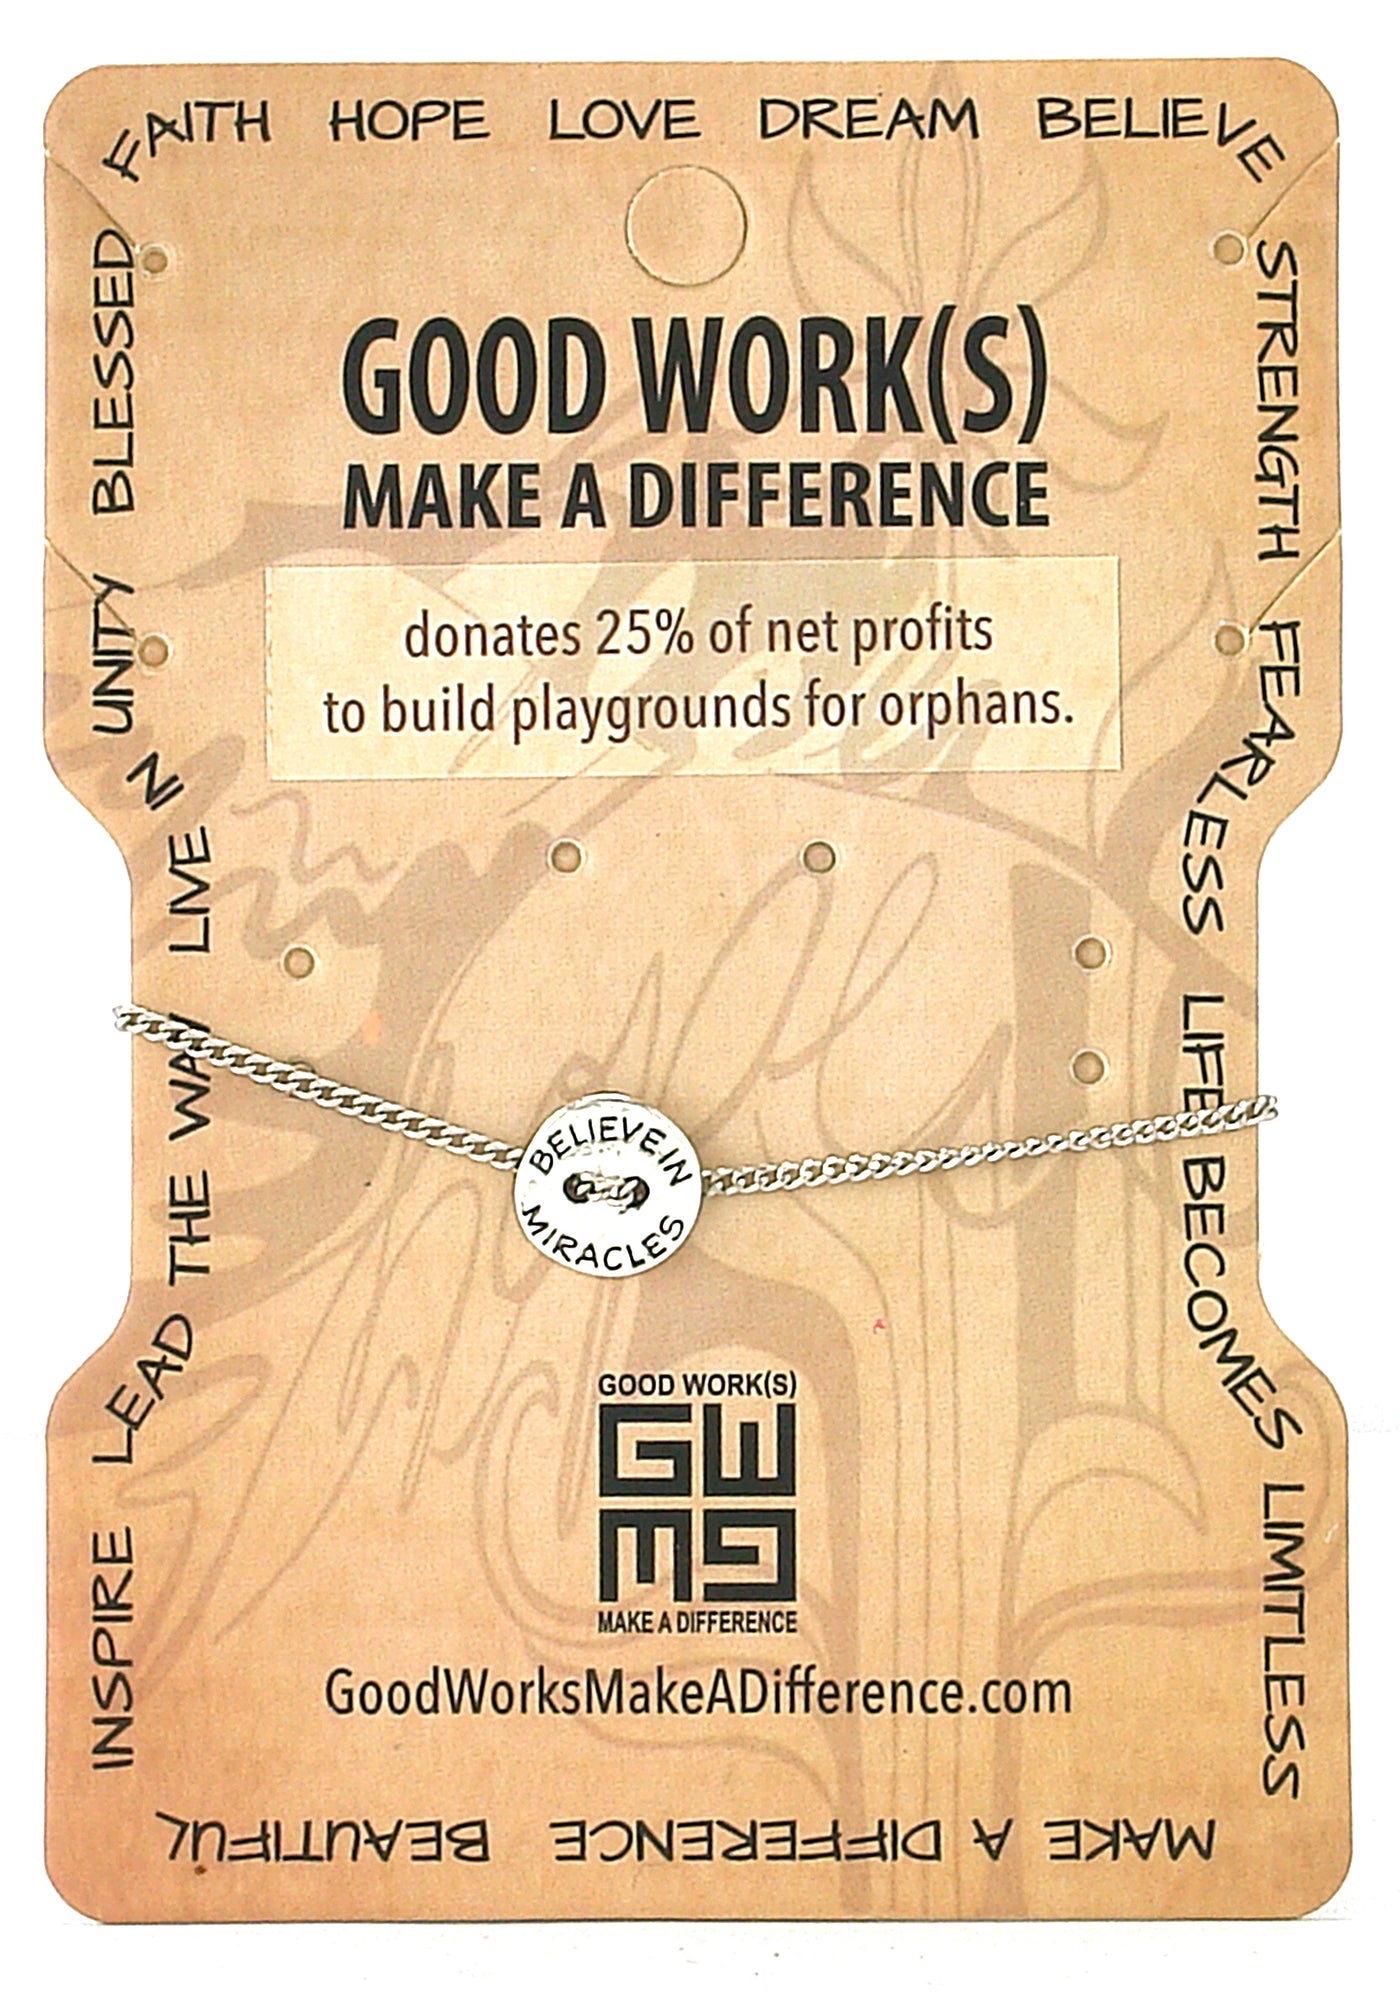 Happy Bracelet-Good Work(s) Make A Difference® | Christian and Inspirational Jewelry Company in Vernon, California